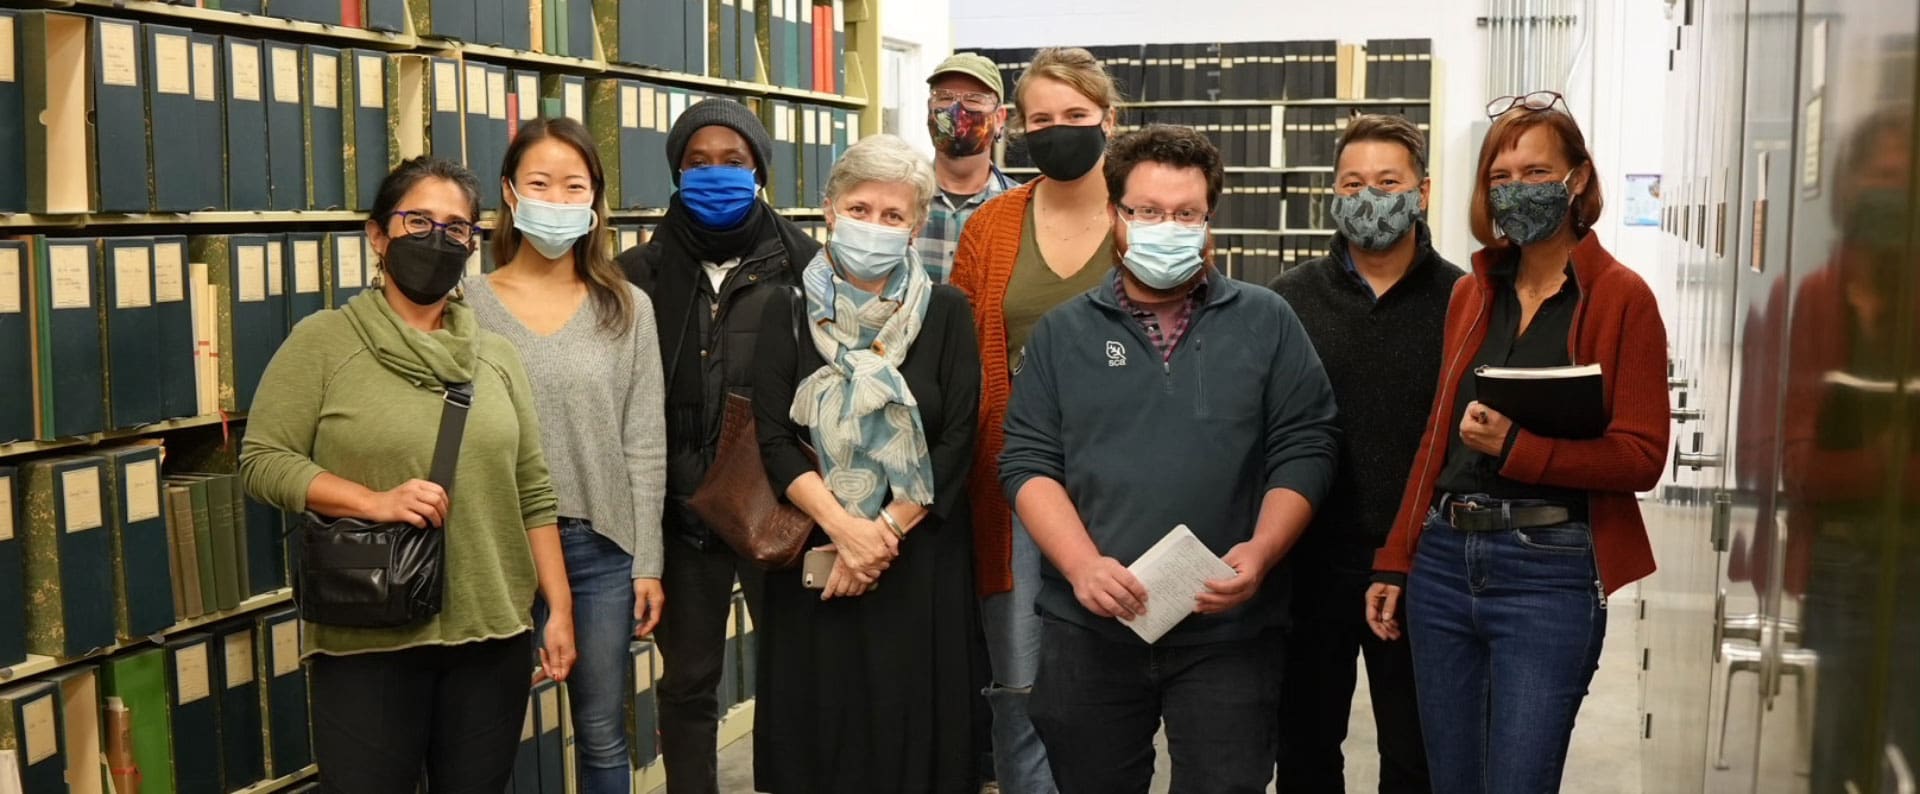 Nine masked members of the R/R team pose for a photo in the University of Michigan's Research Museums Center